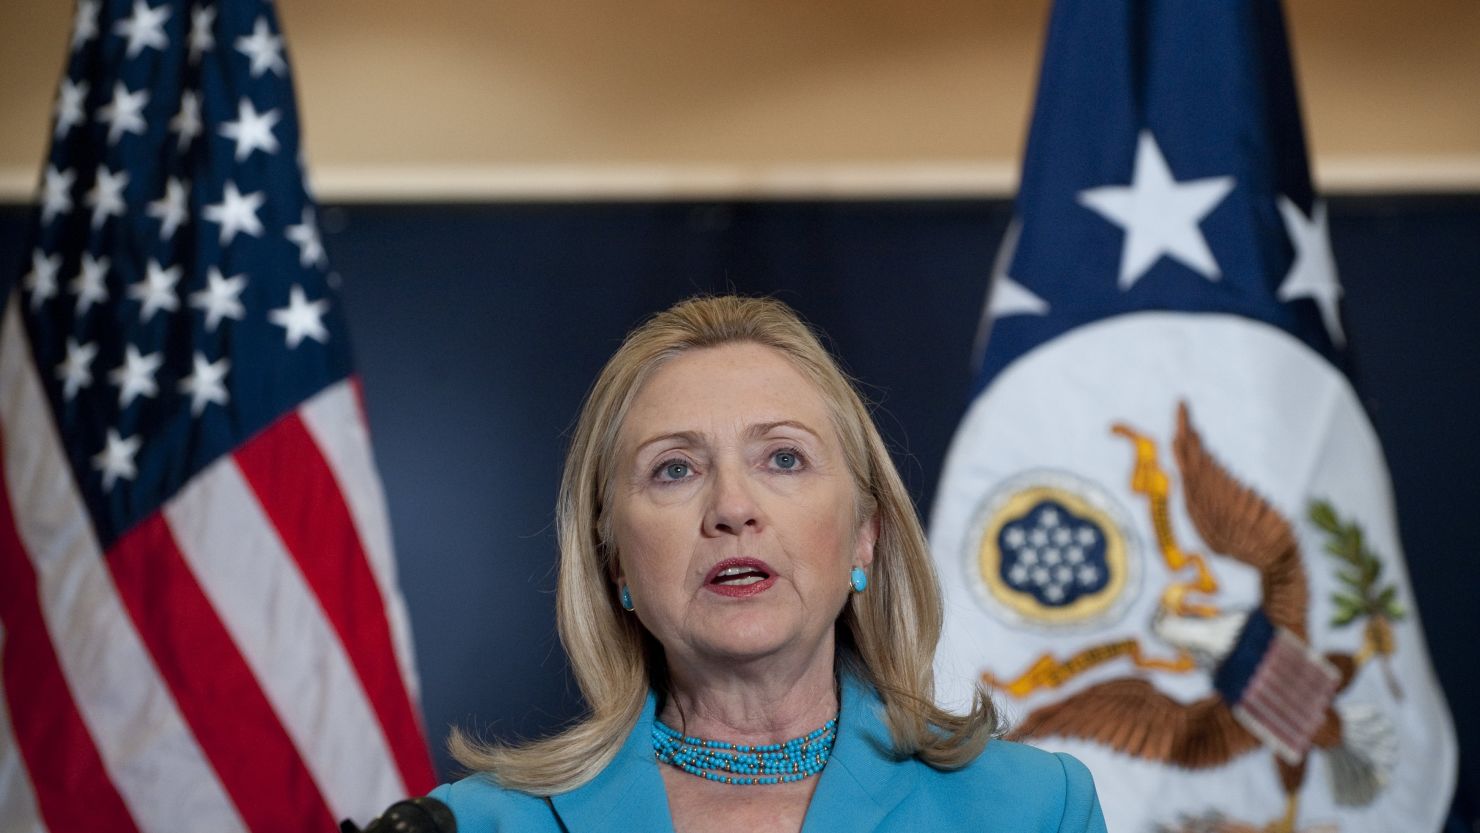 U.S. Secretary of State Hillary Clinton will meet Friday with Thein Sein, the president of Myanmar.